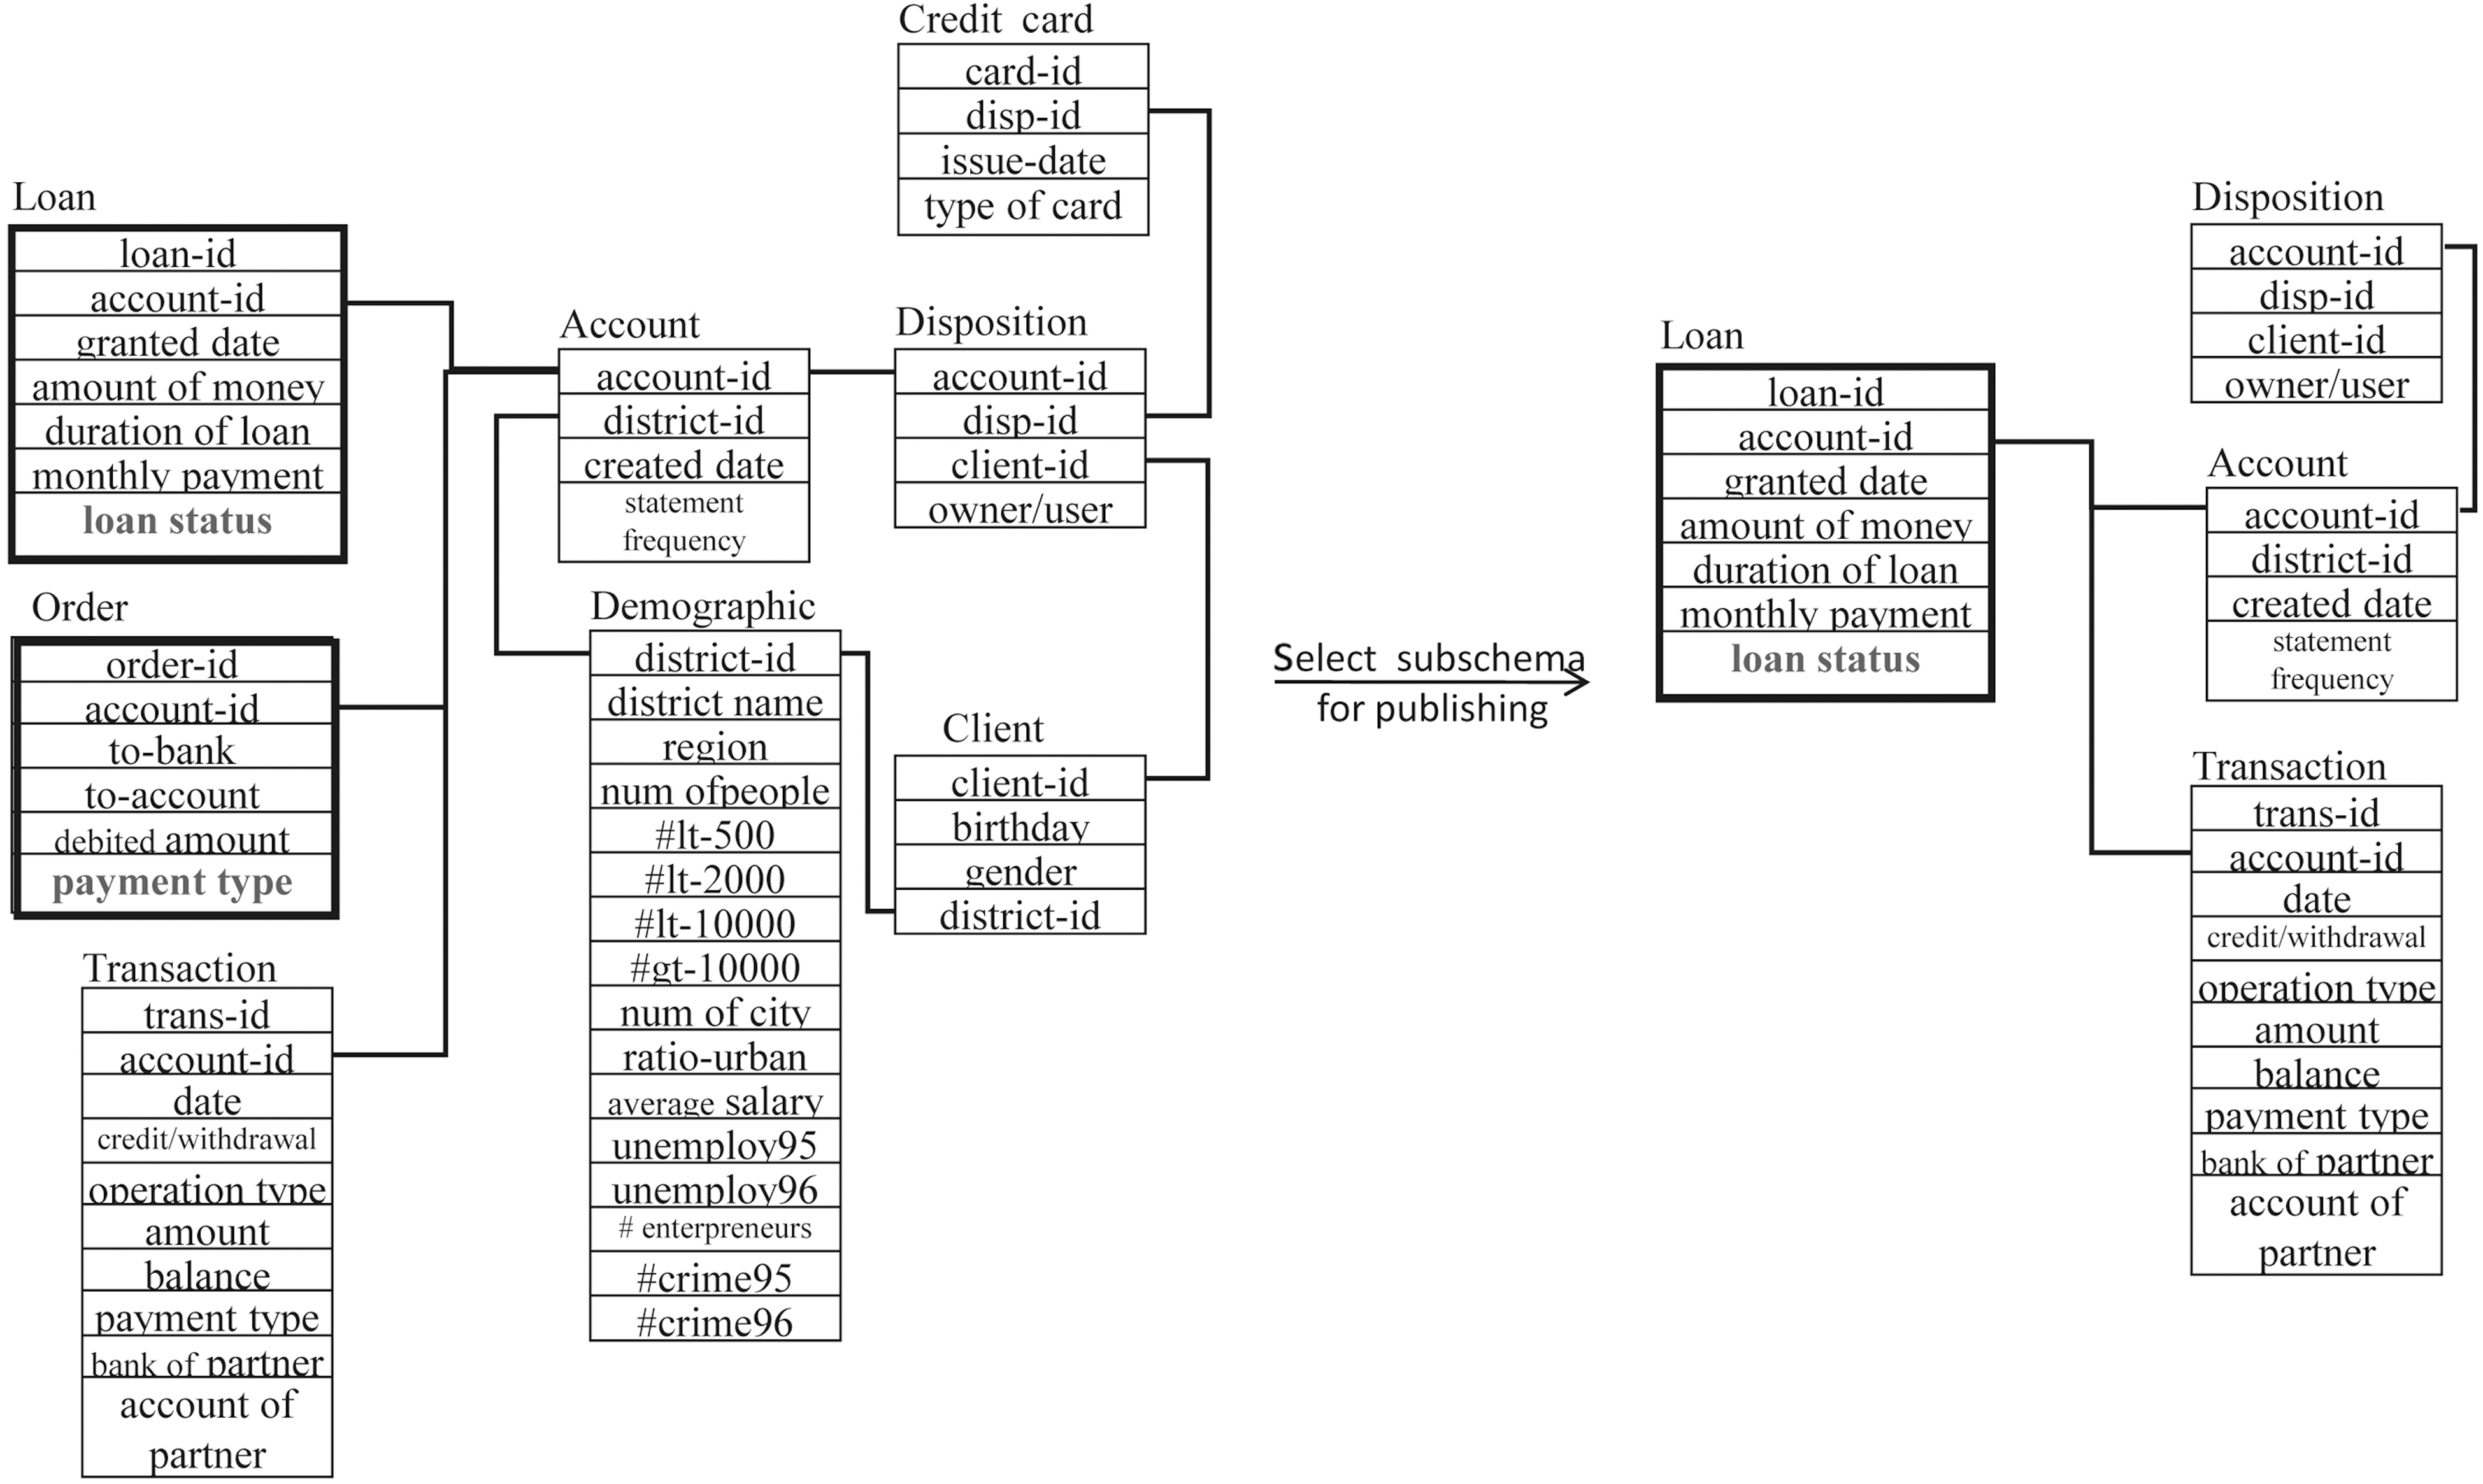 The PKDD1999 financial database where the classification target attribute (loan status) and the confidential attribute (payment type) arehighlighted in red; the left subfigure is the full database schema and the right subfigure depicts the subschema selected for privacy preservationpublishing.